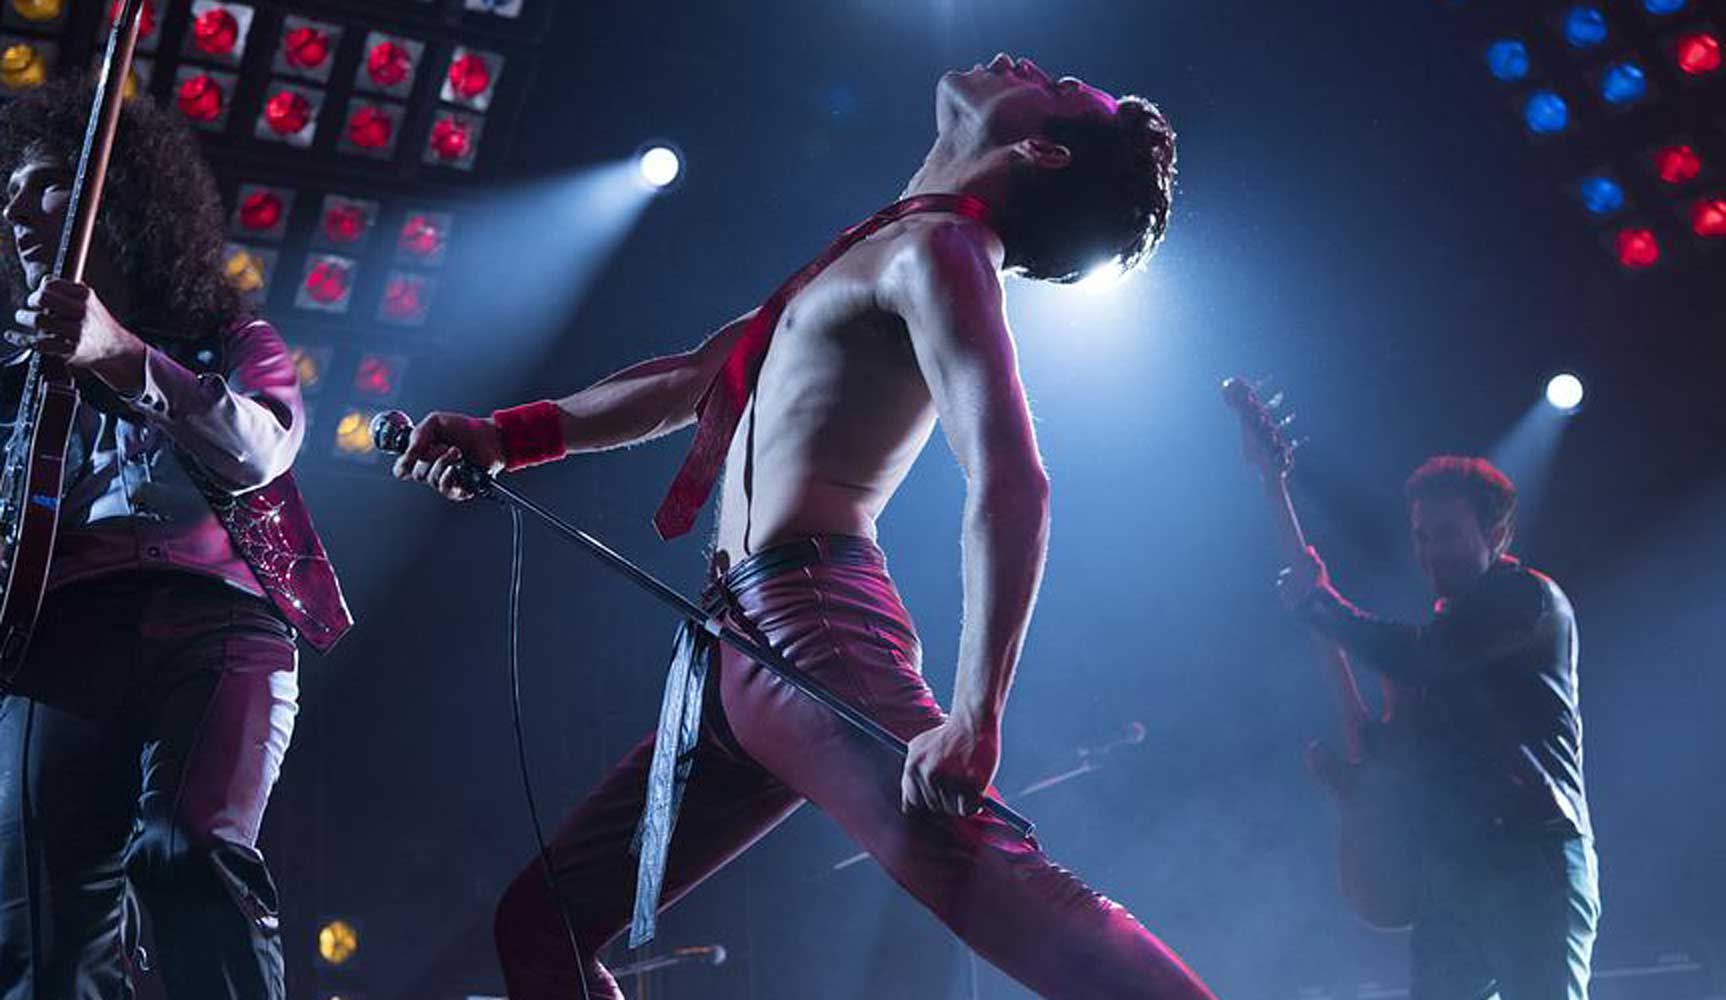 New 'Bohemian Rhapsody' Featurette: What Does It Take To Become A Rock Legend?